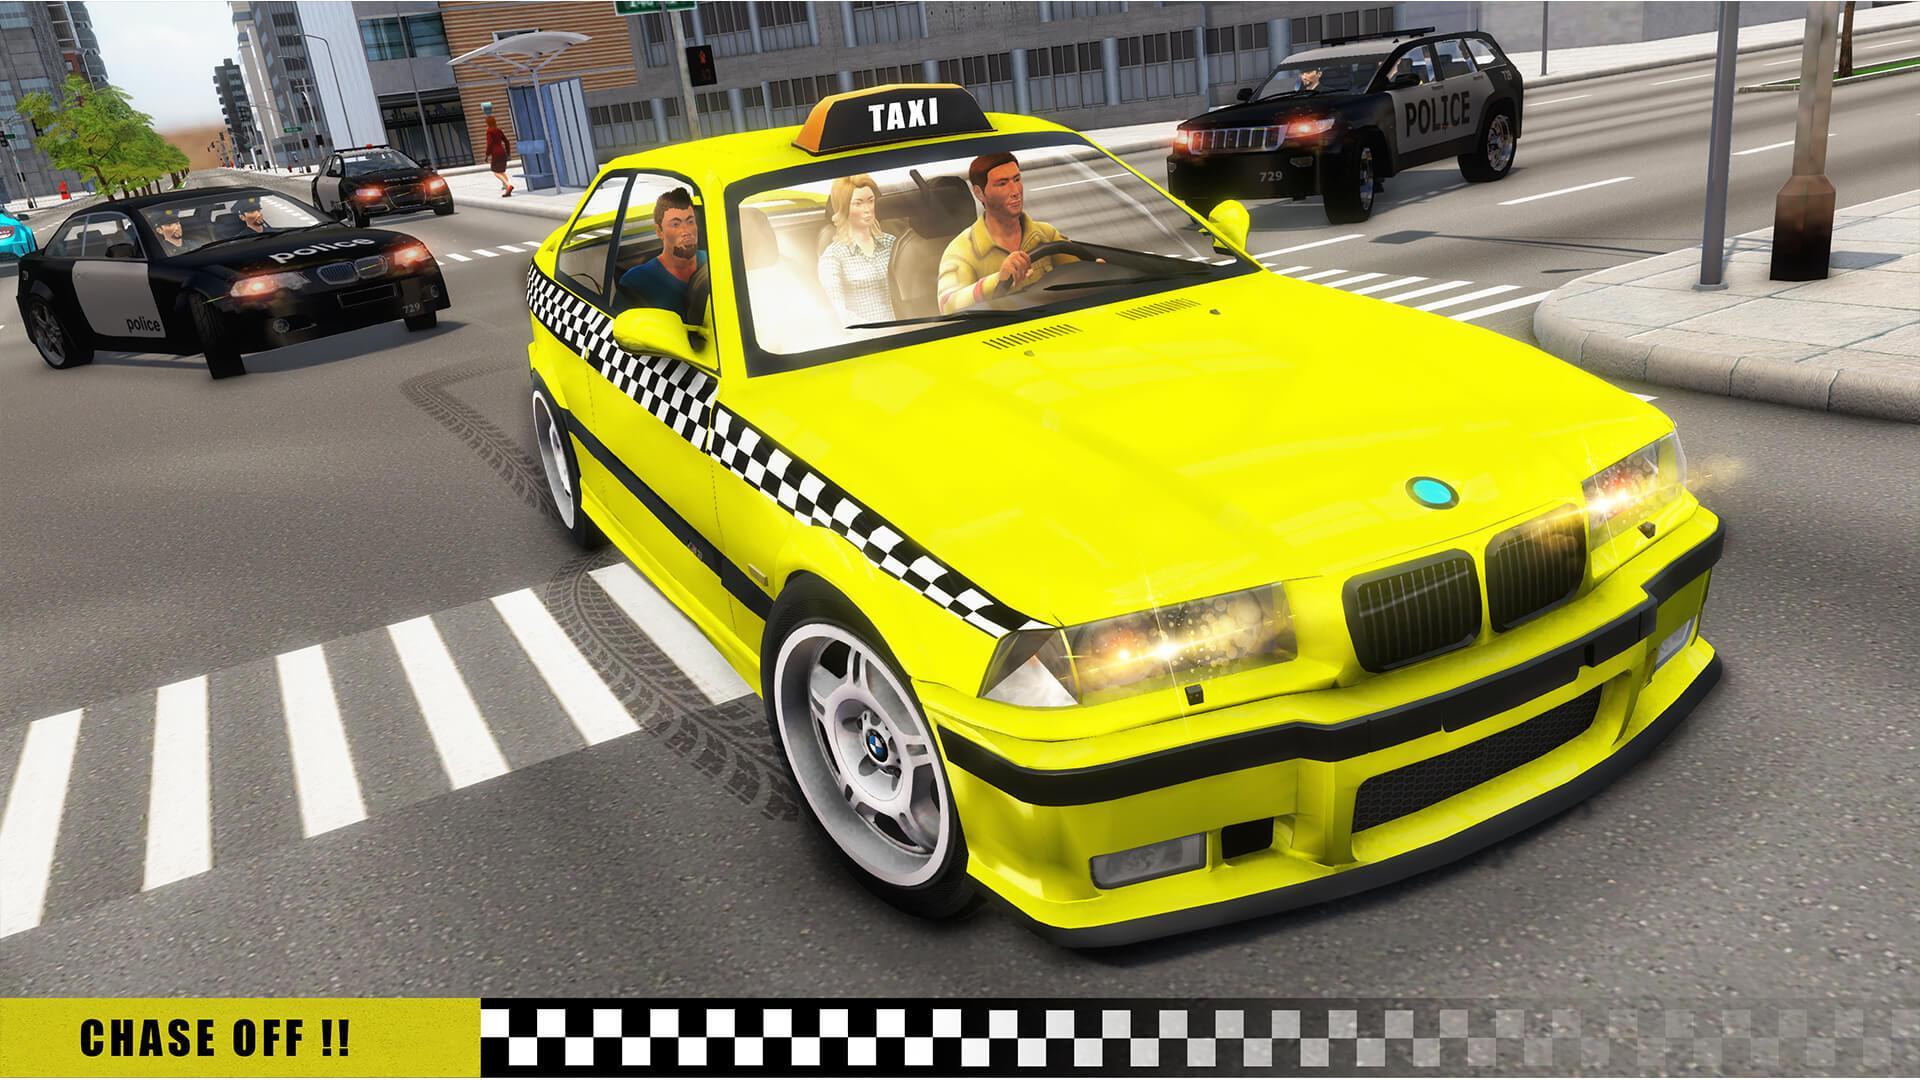 Taxi car driving. Симулятор такси. Игра такси. Игра машина такси. Taxi mobile игра.